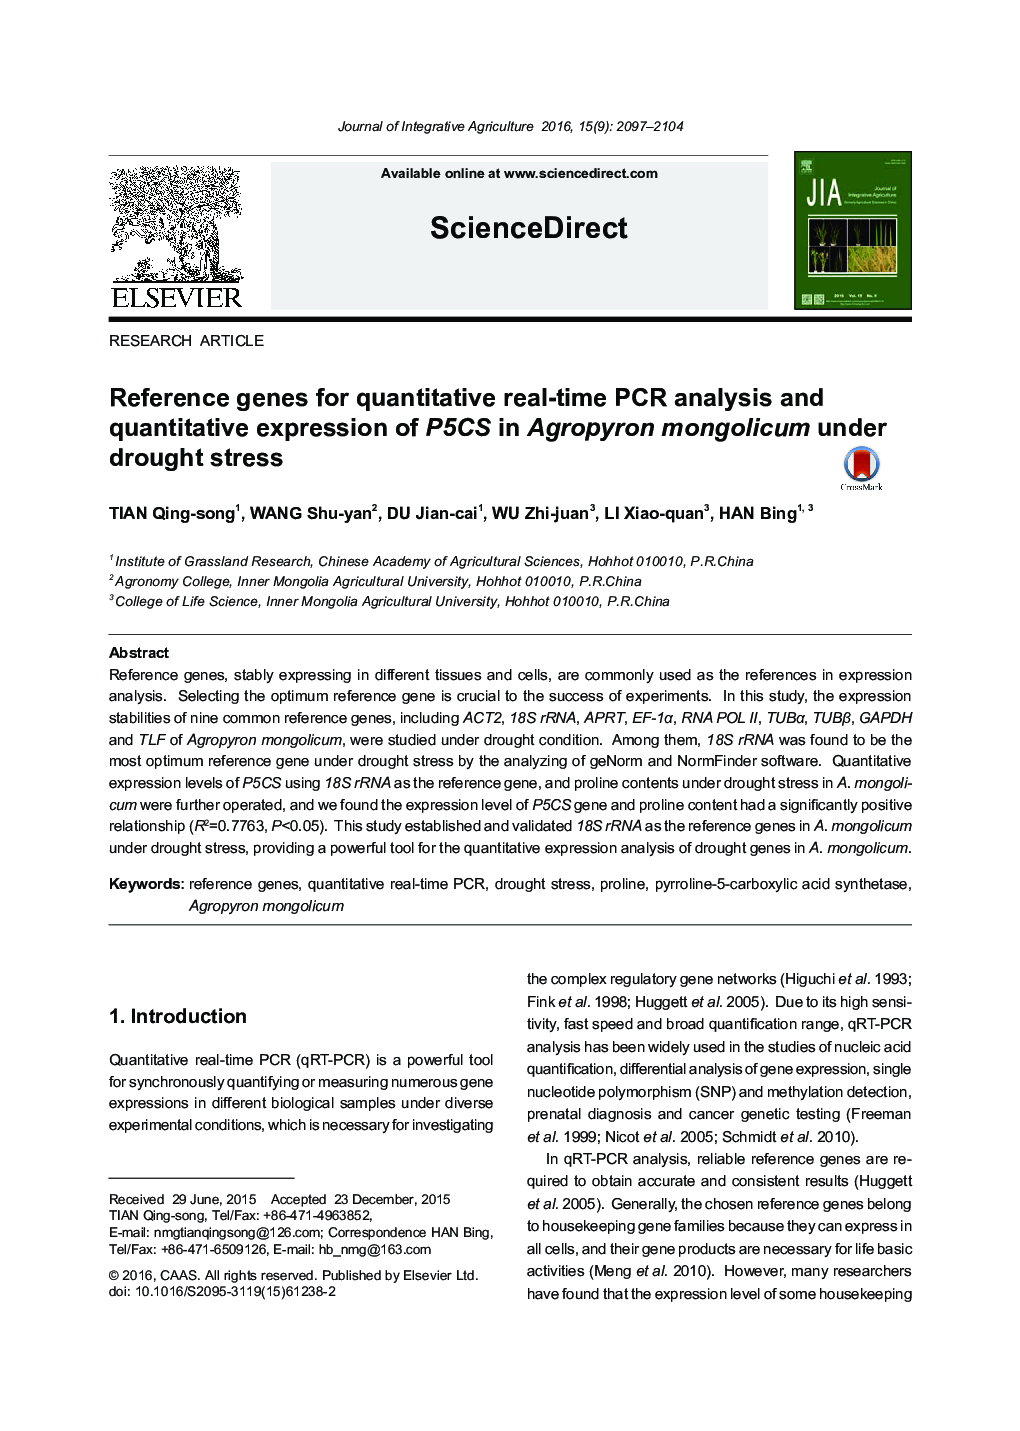 Reference genes for quantitative real-time PCR analysis and quantitative expression of P5CS in Agropyron mongolicum under drought stress